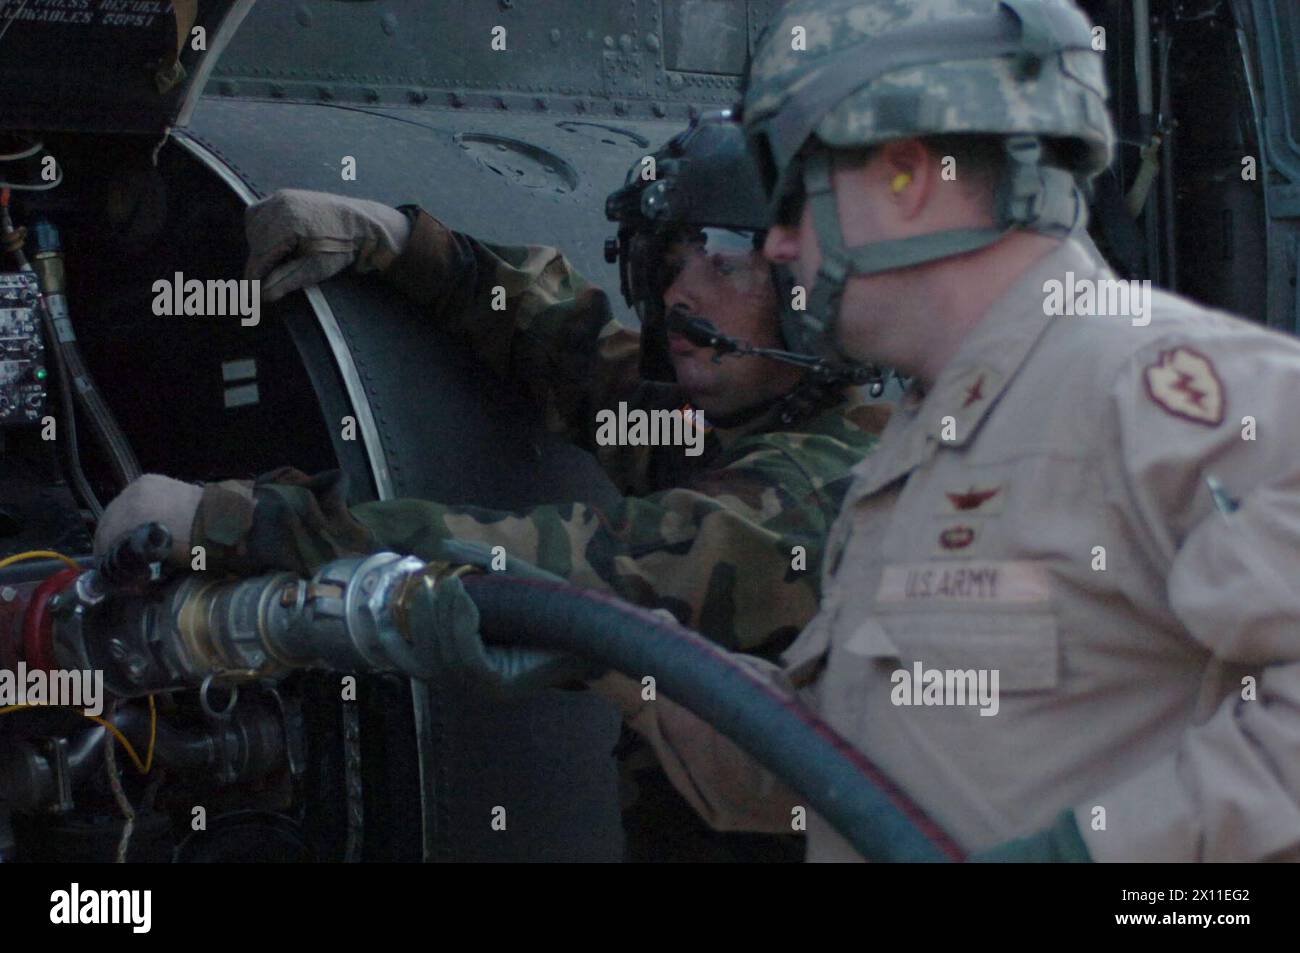 Original Caption: Lt. Col. Michael Fleetwood, commander, Echo Company, 3rd Battalion 25th Combat Aviation Brigade and Pfc. Nathan Allcock, crew chief, 3-25, pumps the one millionth gallon of fuel into a CH-47, at Contingency Operating Base Speicher ca. July 03, 2004 Stock Photo